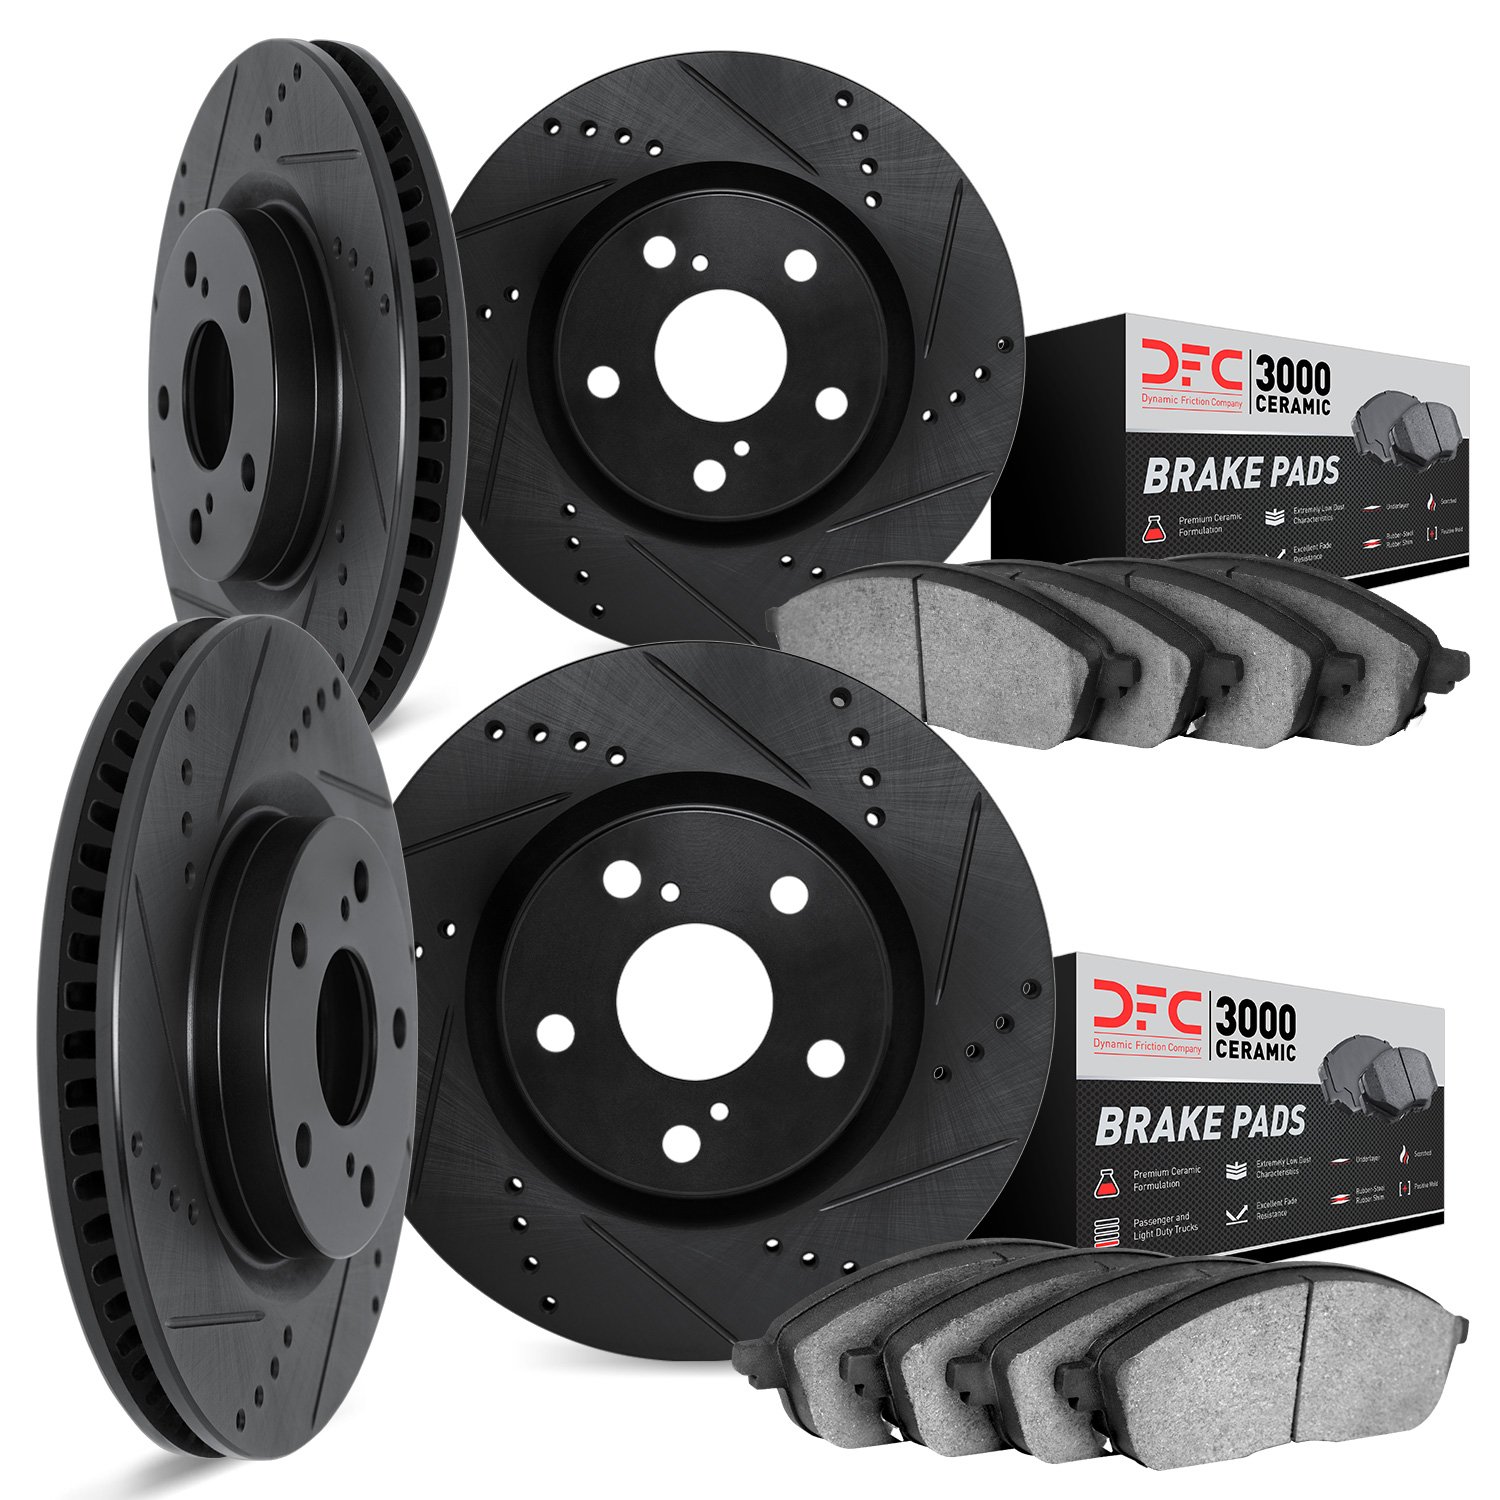 8304-31065 Drilled/Slotted Brake Rotors with 3000-Series Ceramic Brake Pads Kit [Black], 2004-2010 BMW, Position: Front and Rear